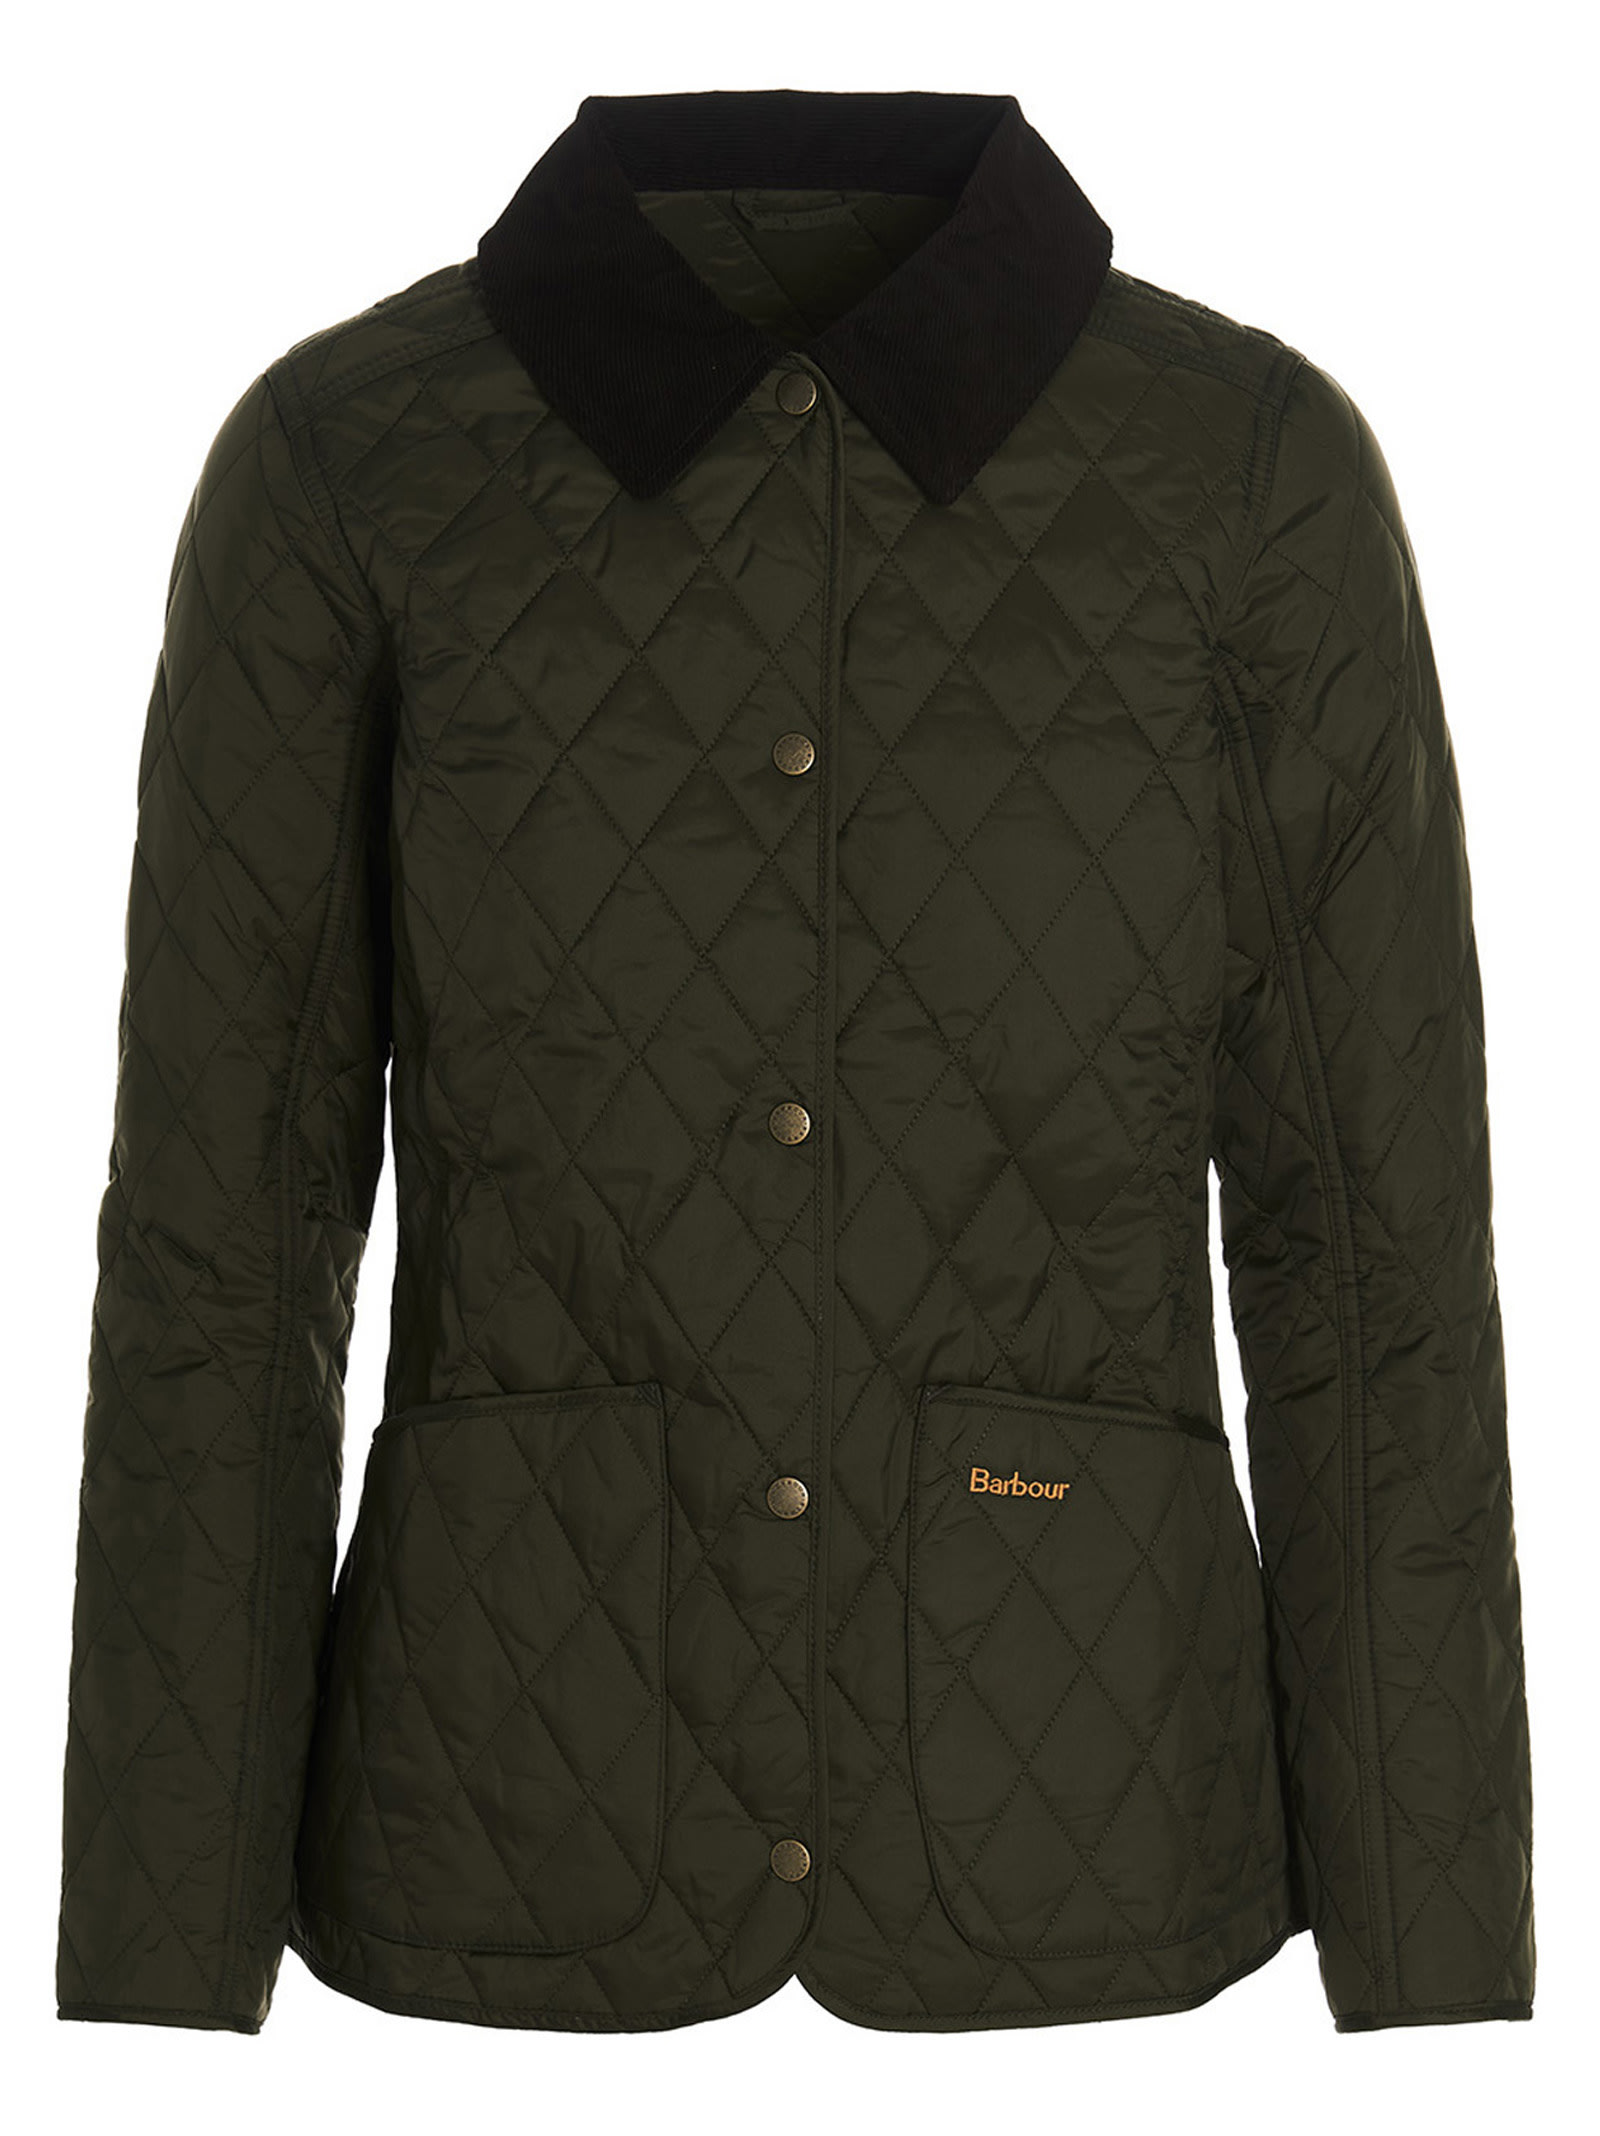 Barbour annandale Jacket